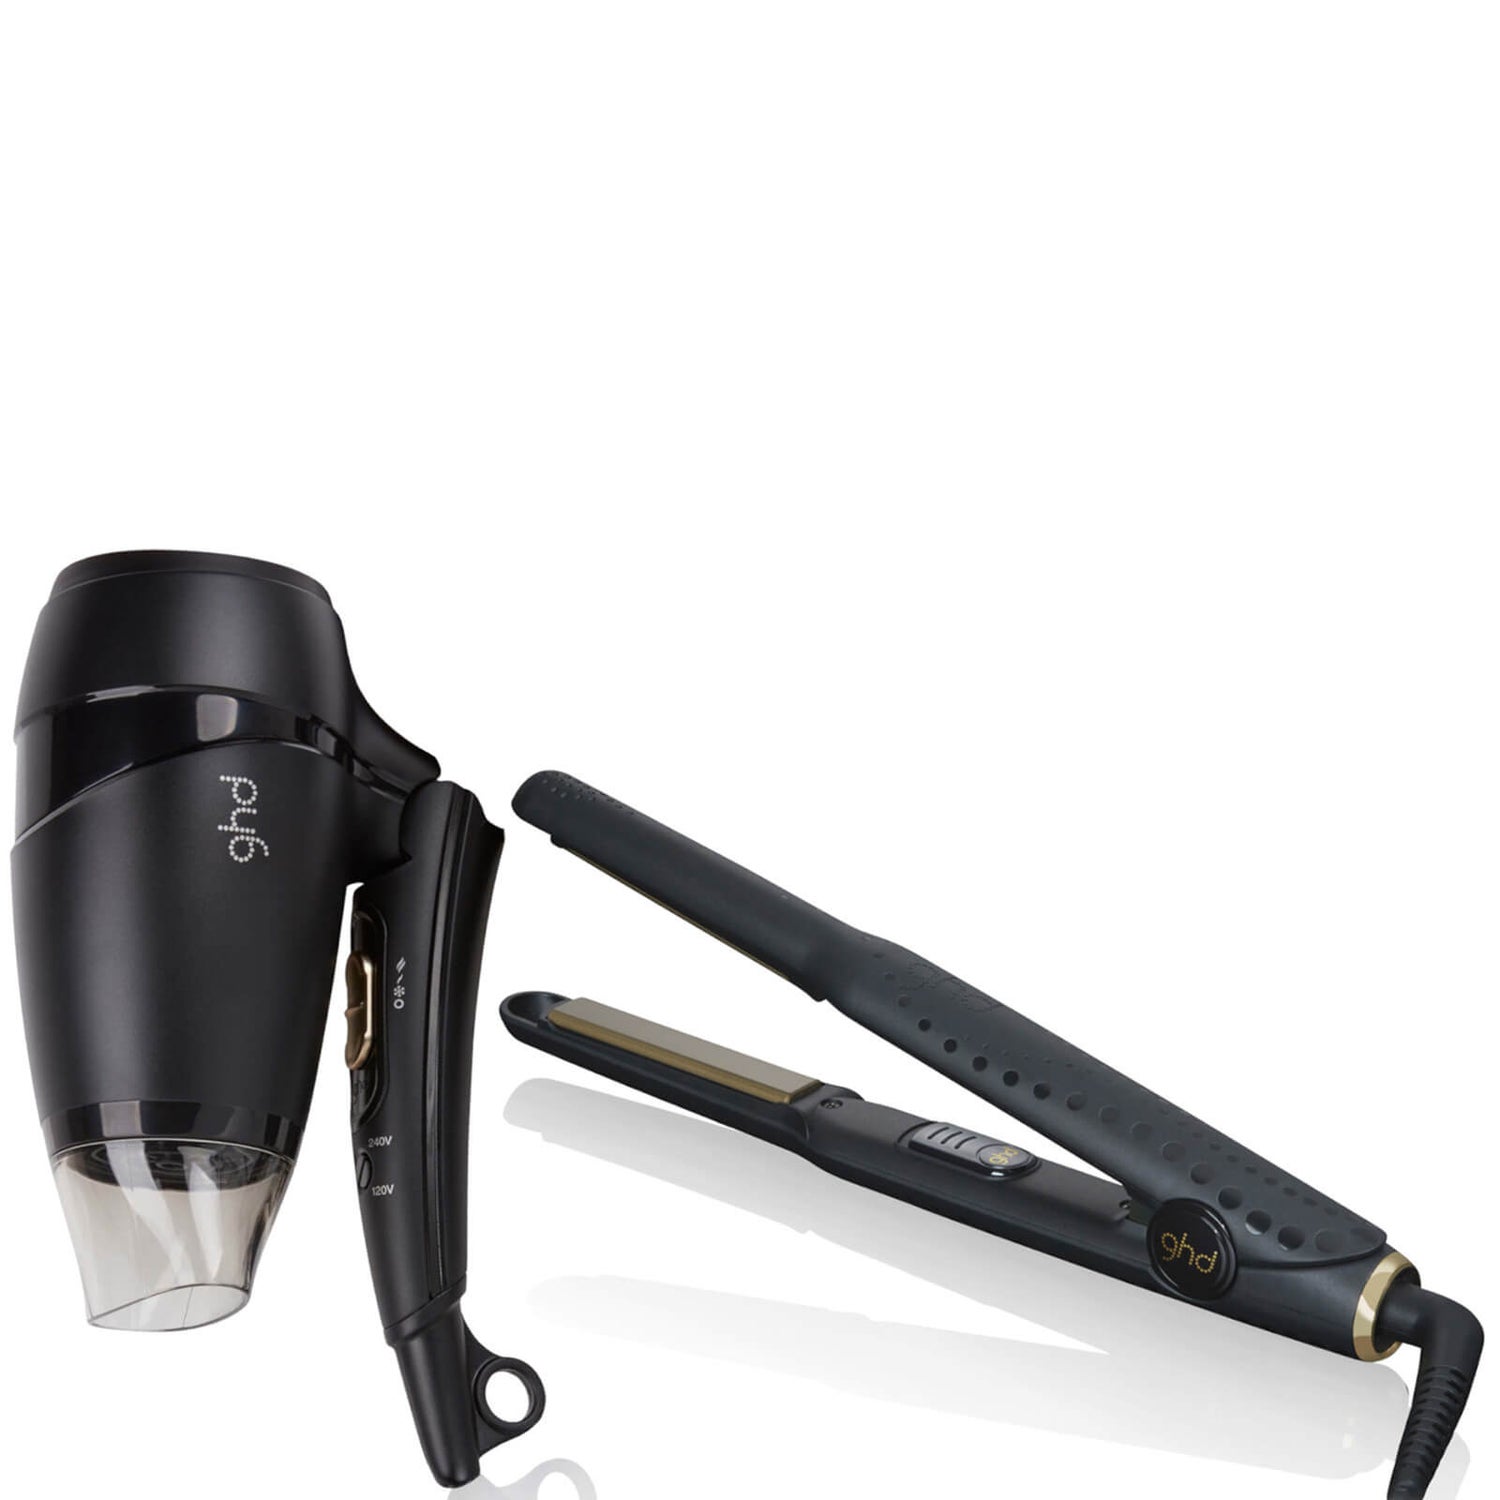 ghd Travel Straightener and Dryer Duo